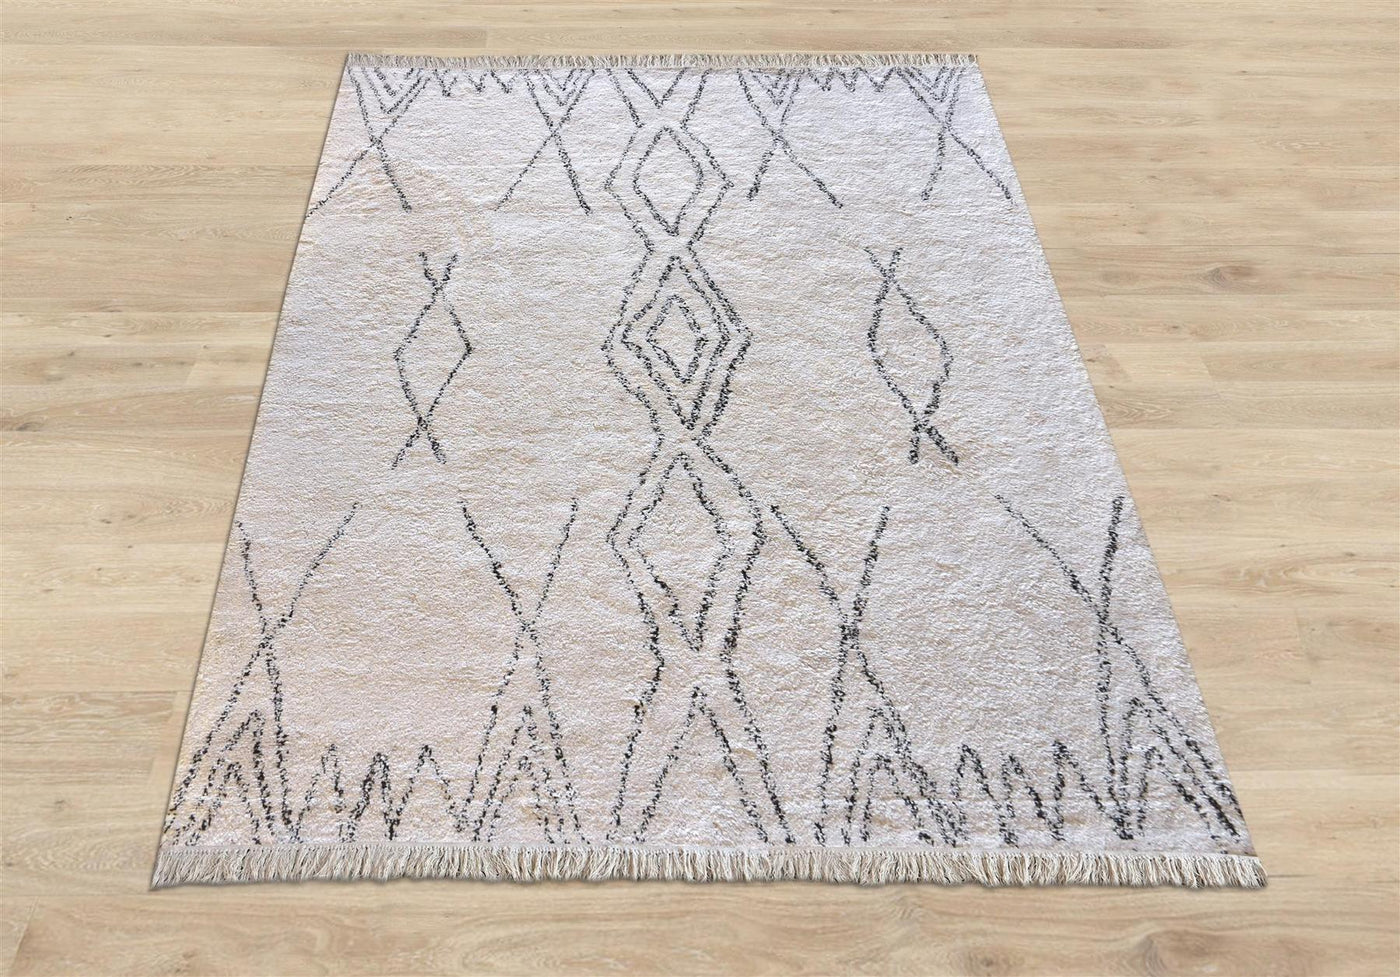 Bryza Cotton Rug-Furnishings-RECYCLED COTTON & COTTON RUGS, Rugs-Forest Homes-Nature inspired decor-Nature decor